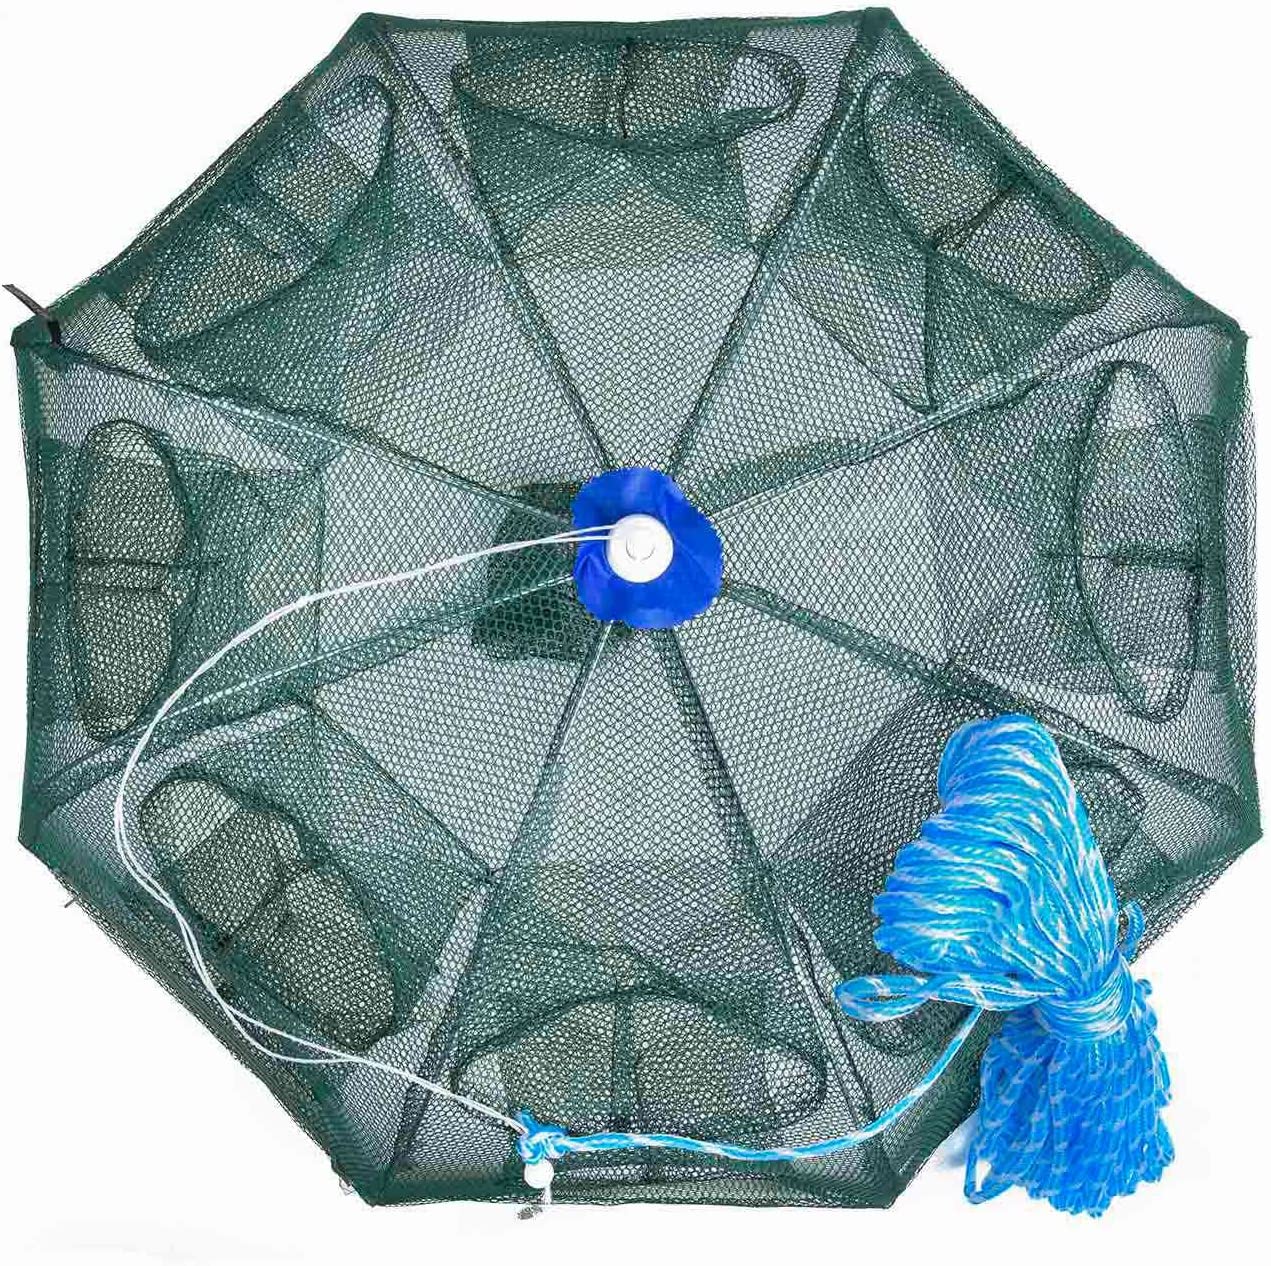 Goture Collapsible Folded Crab Trap Fishing Net Minnow Fish Crayfish  Crawdad Shrimp Bait Trap - Automatic 8 Sides 16 Holes with 100ft Rope